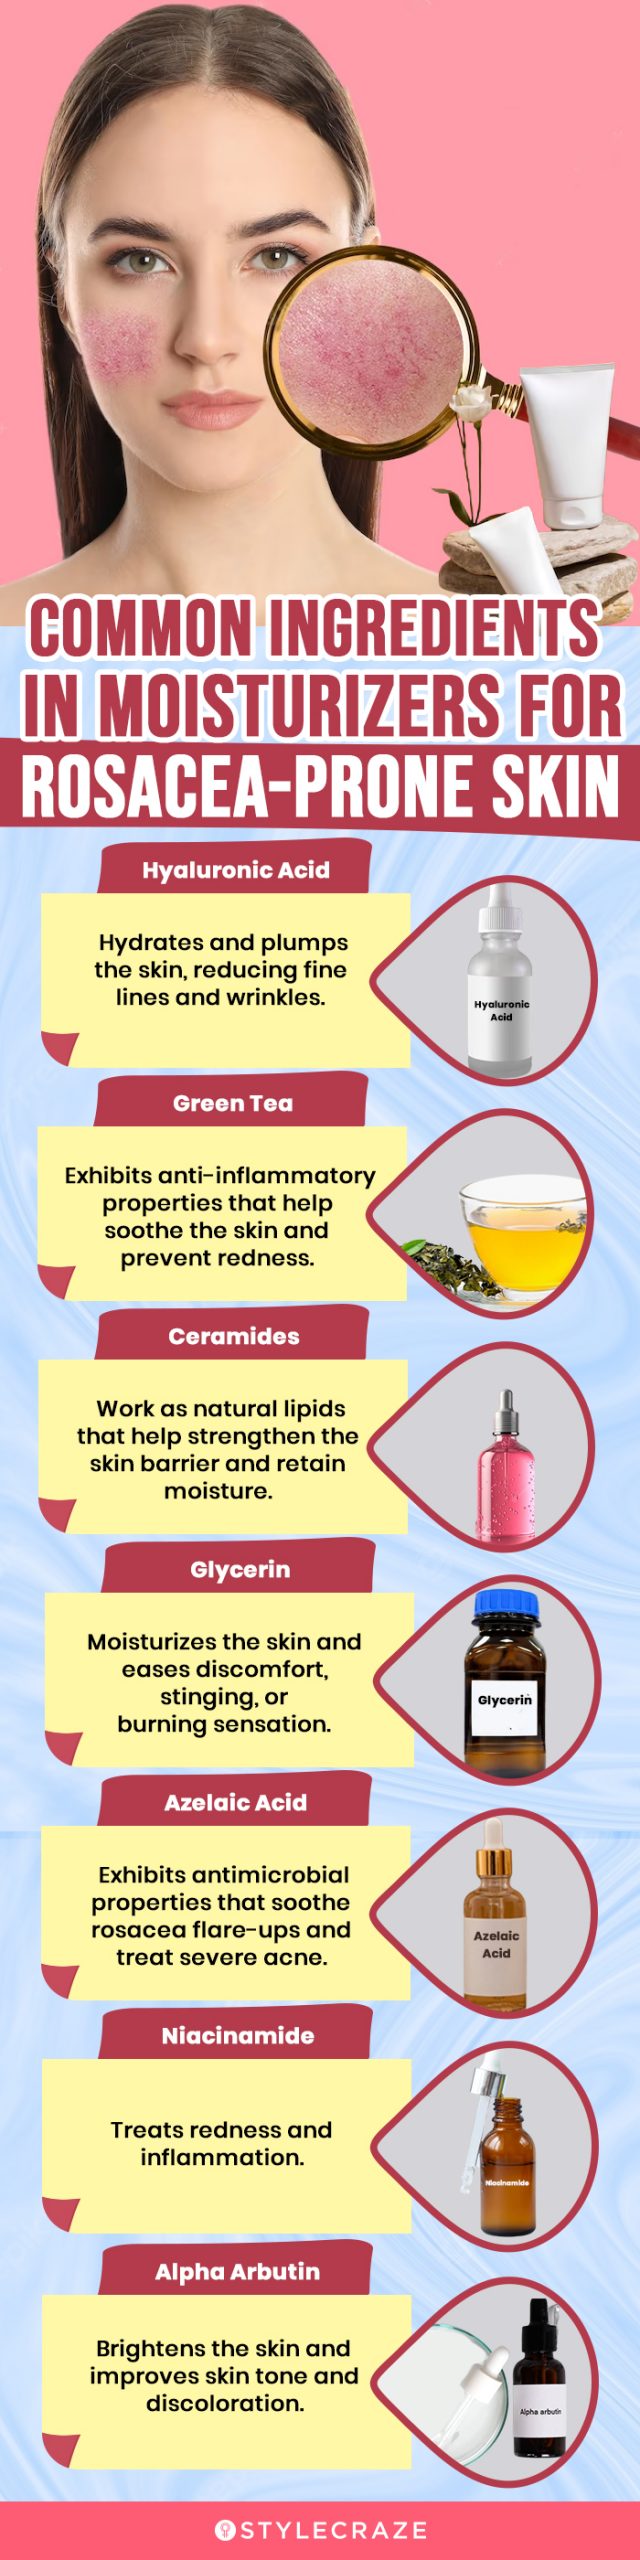 Common Ingredients In Moisturizers For Rosacea-Prone Skin (infographic)